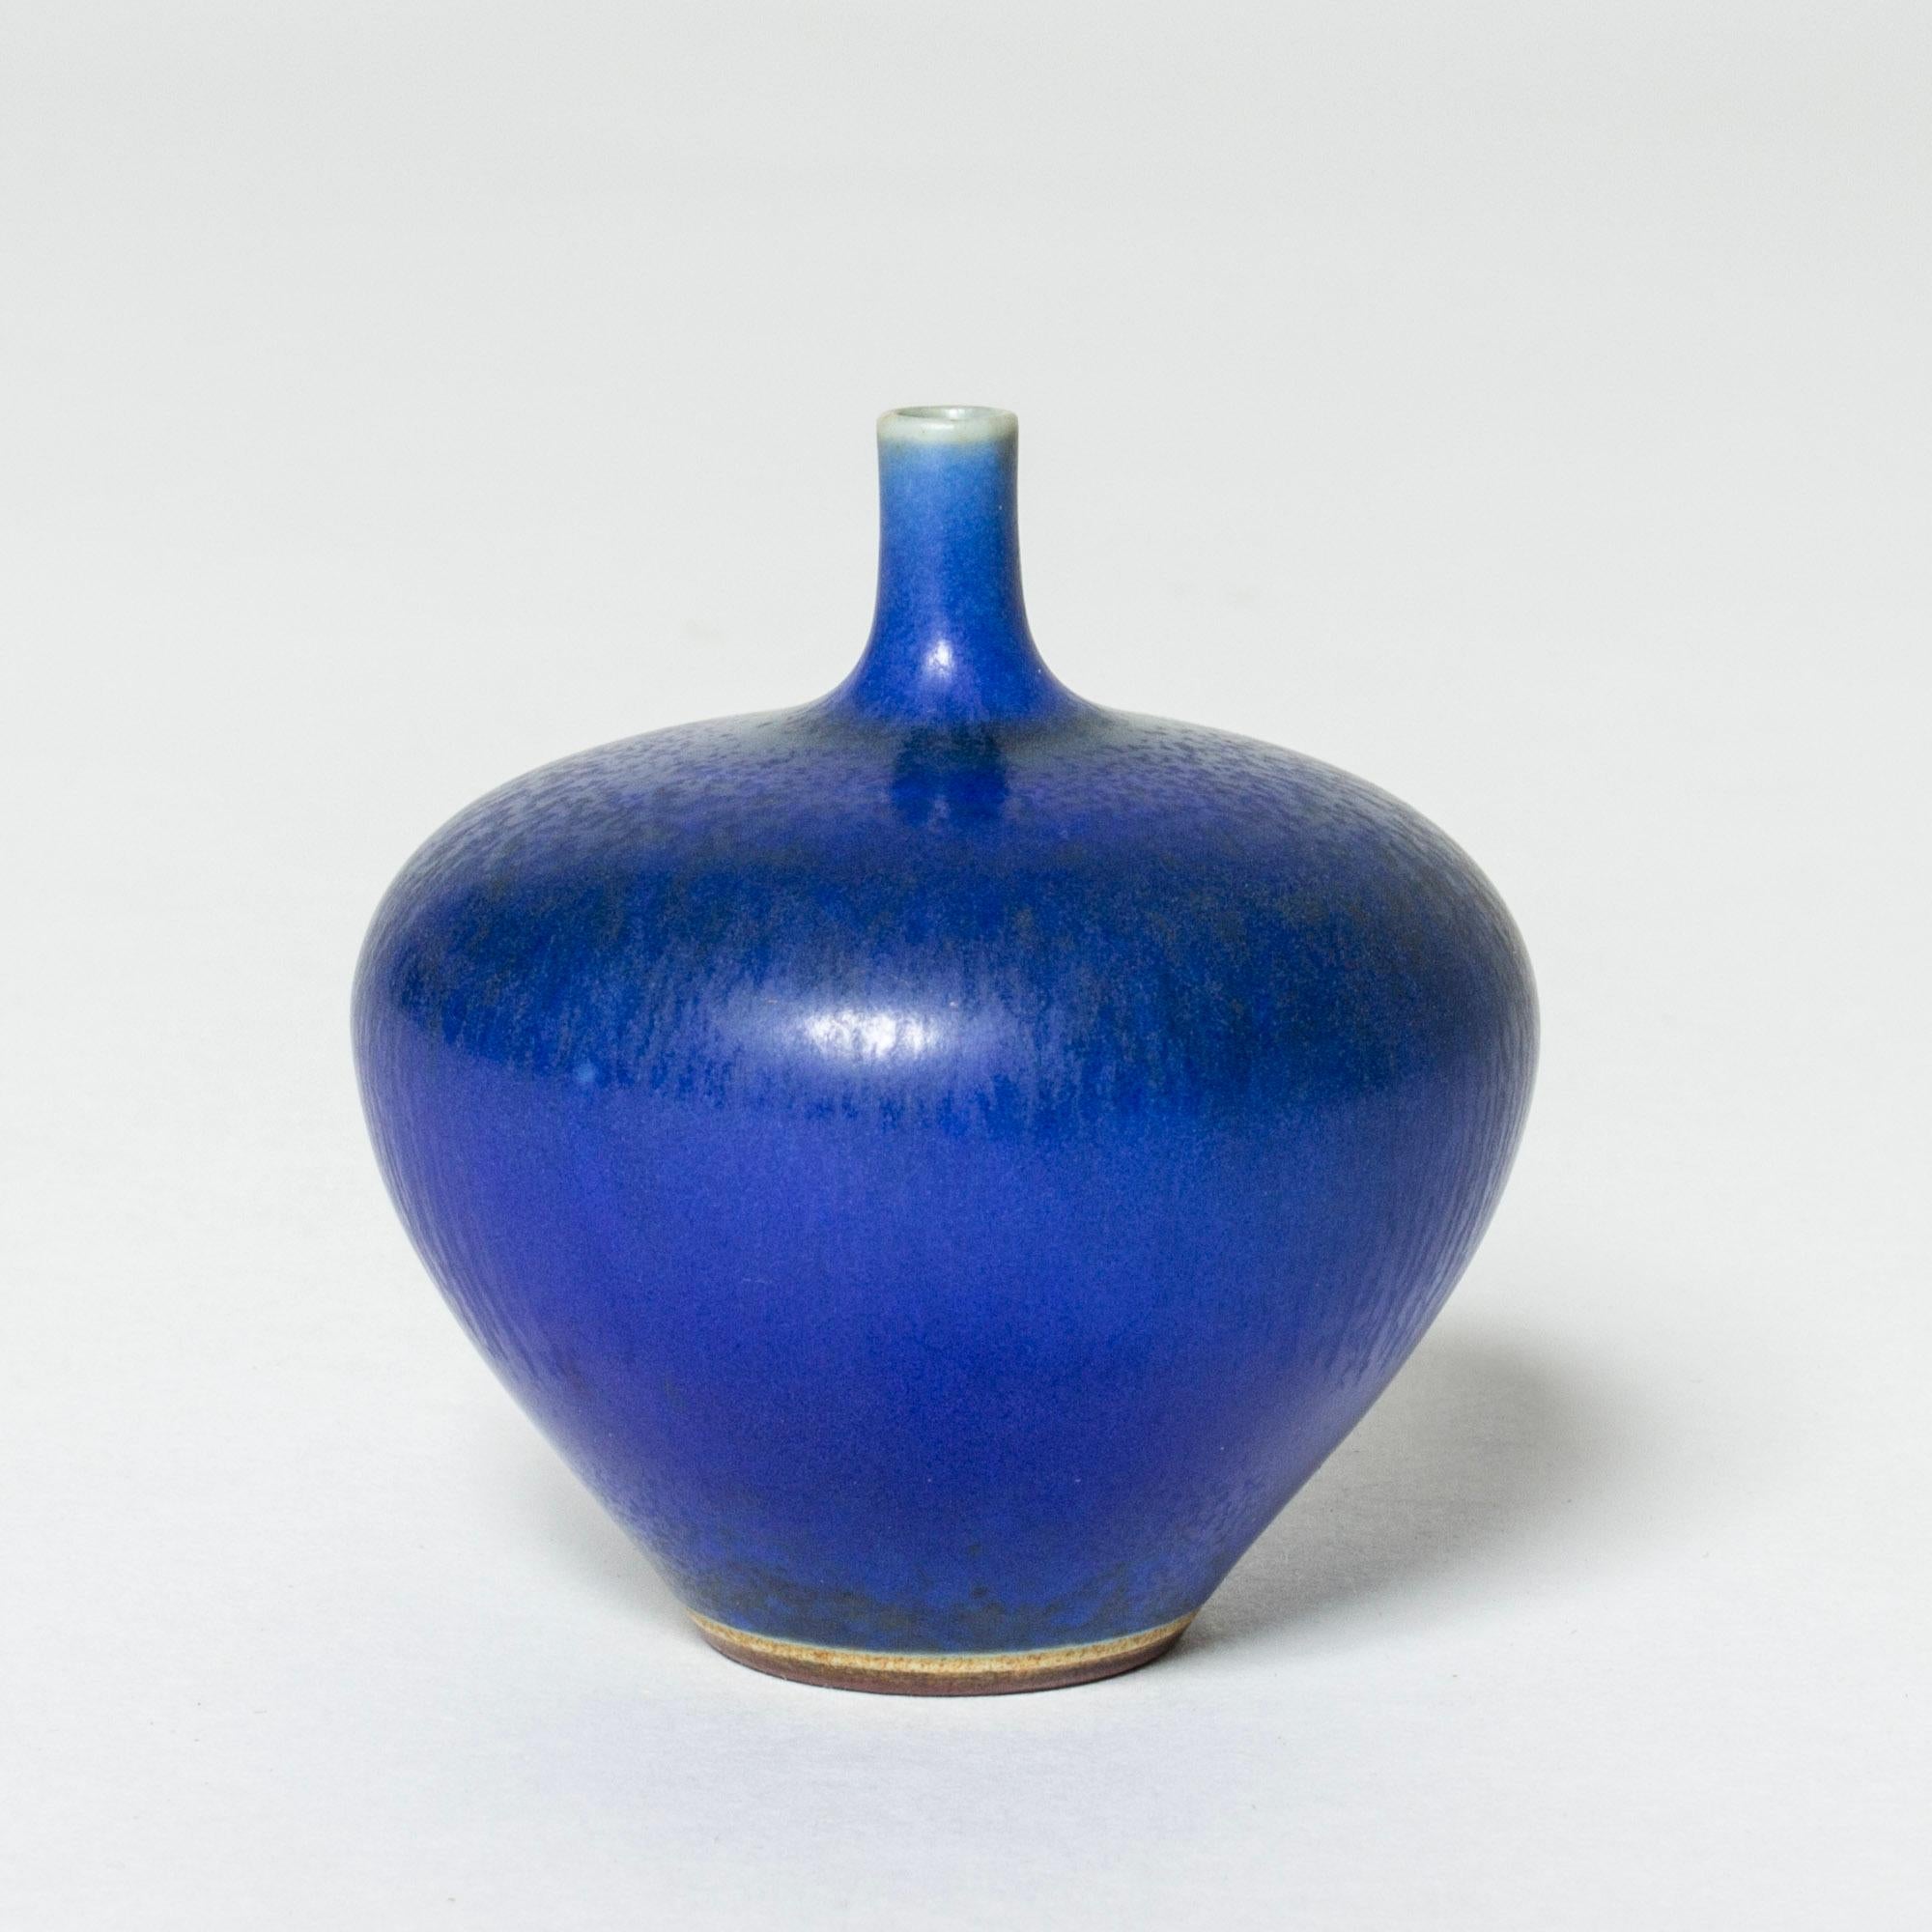 Miniature stoneware vase by Berndt Friberg in a plump apple form. Vibrant blue hare’s fur glaze.

Berndt Friberg was a Swedish ceramicist, renowned for his stoneware vases and vessels for Gustavsberg. His pure, composed designs with satiny,